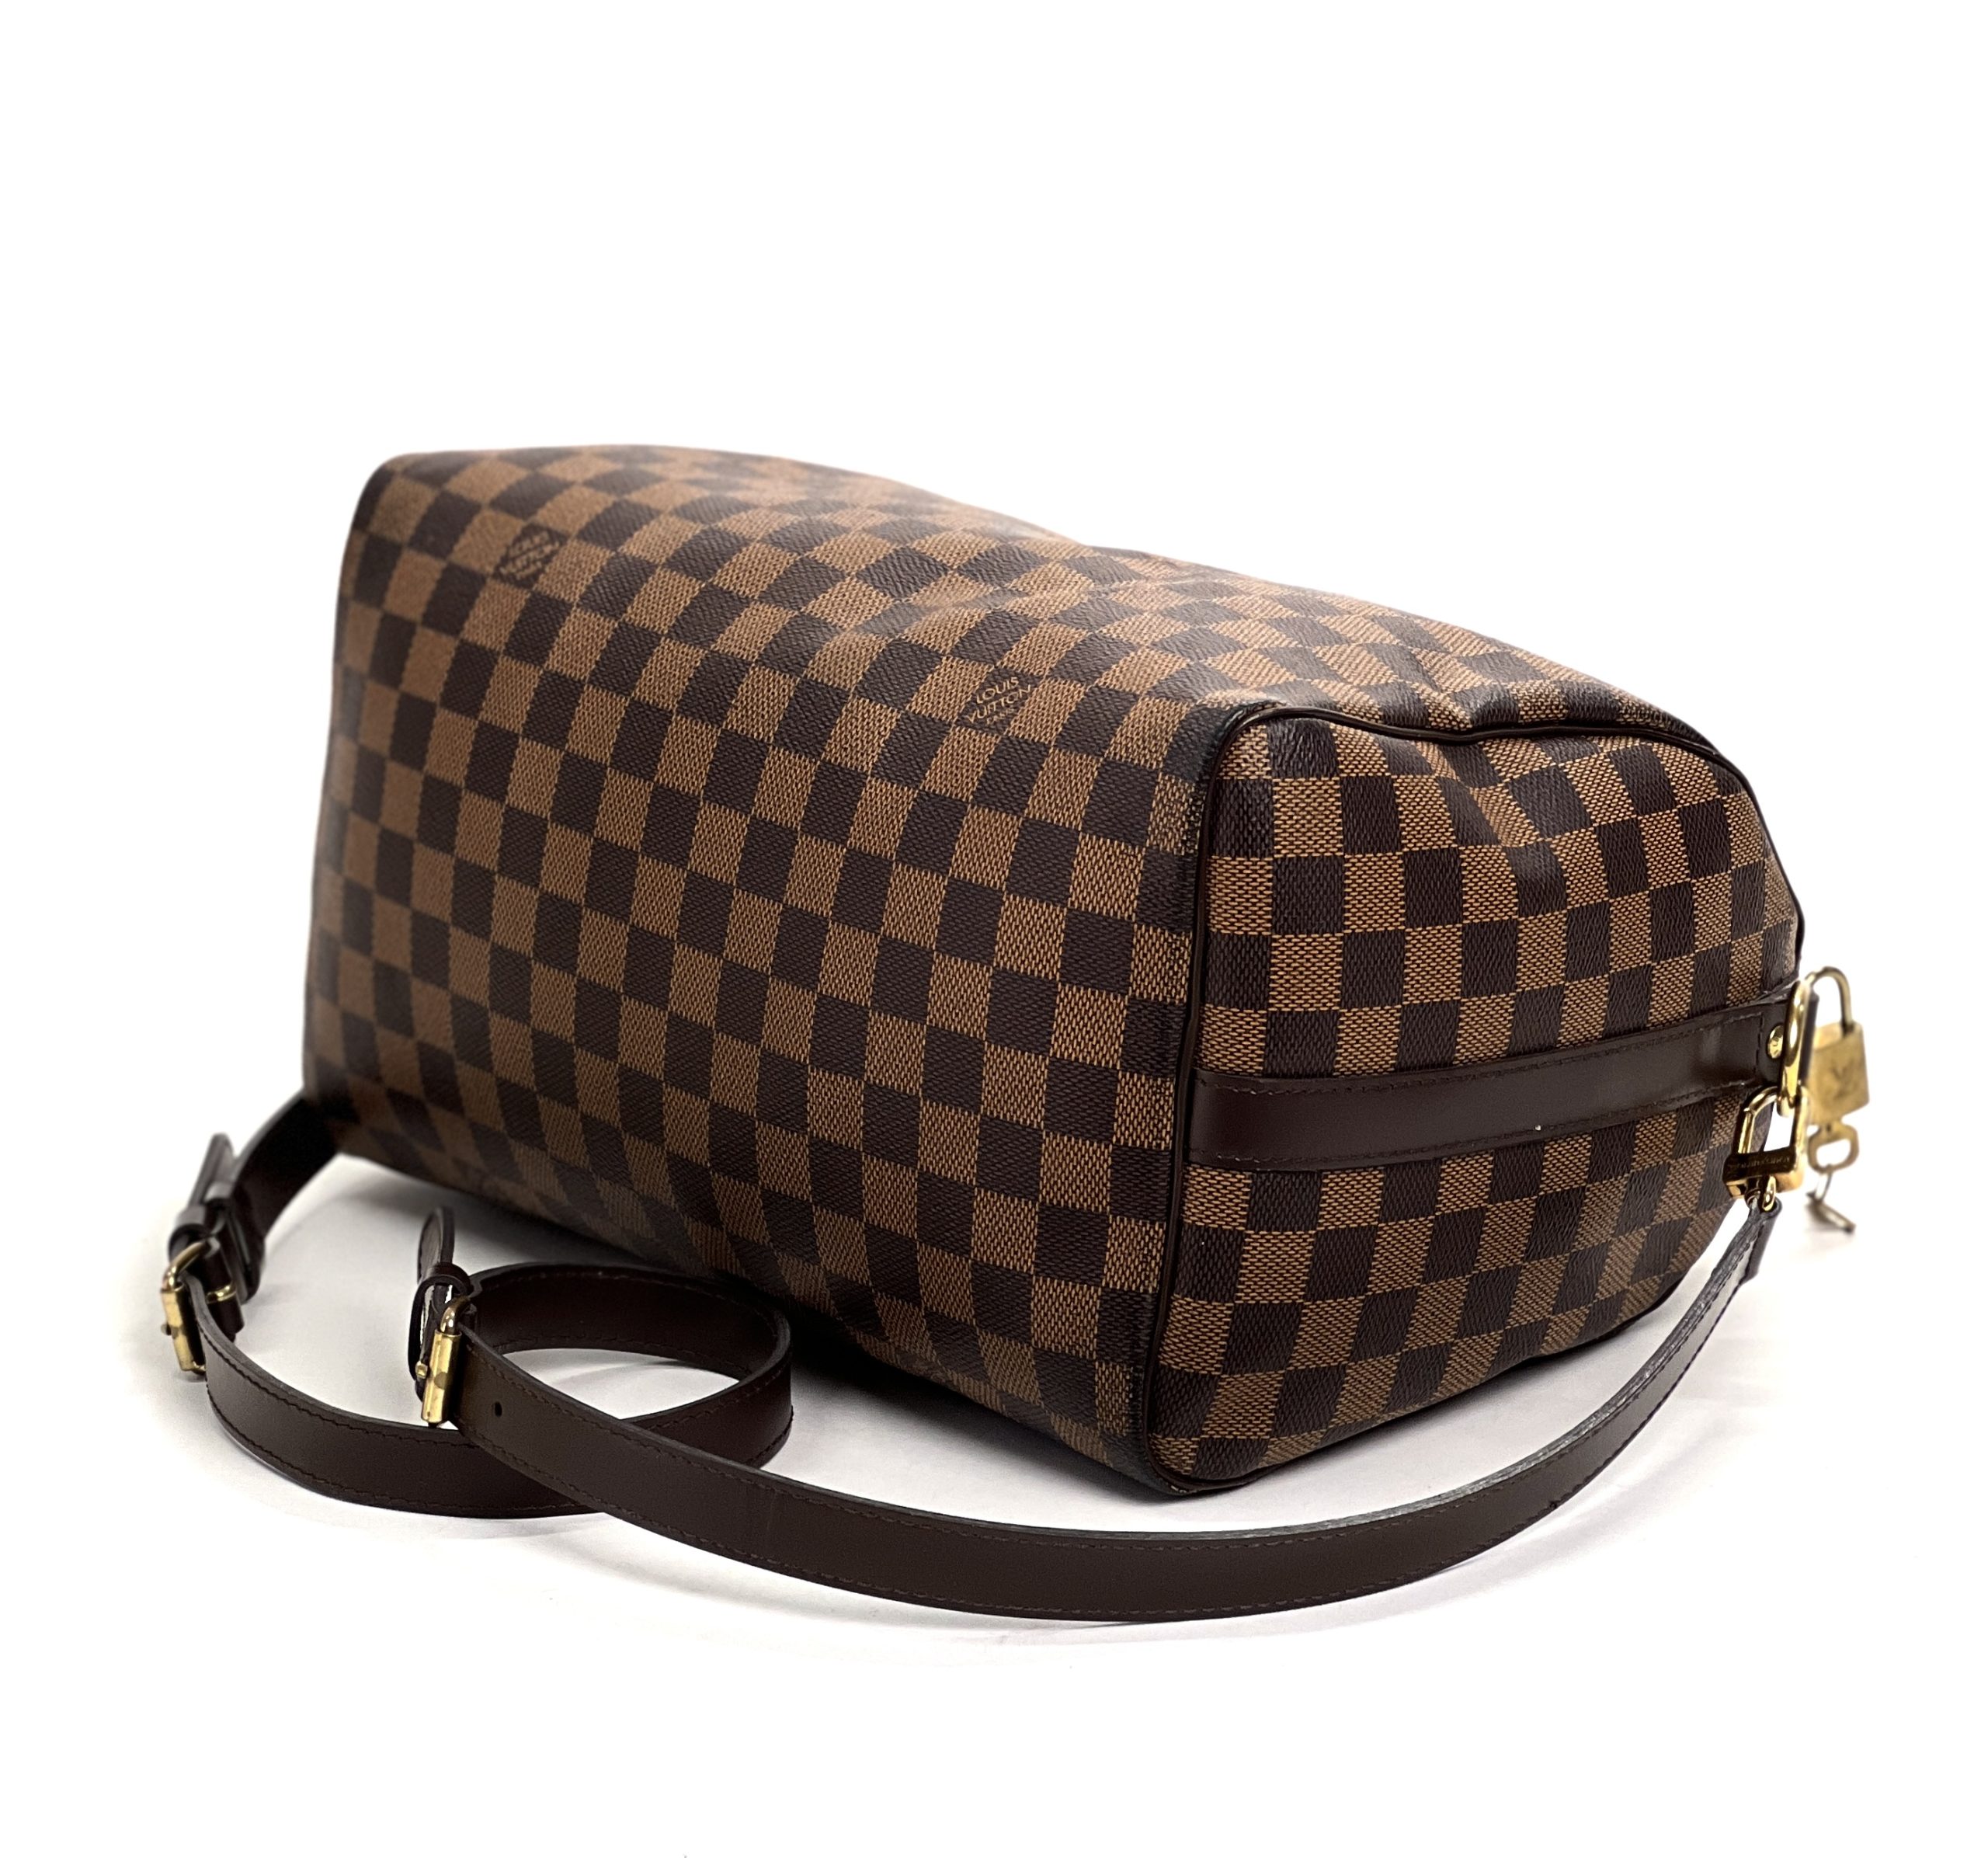 100% AUTHENTIC LIMITED EDITION LOUIS VUITTON SPEEDY 30 BANDOULIERE